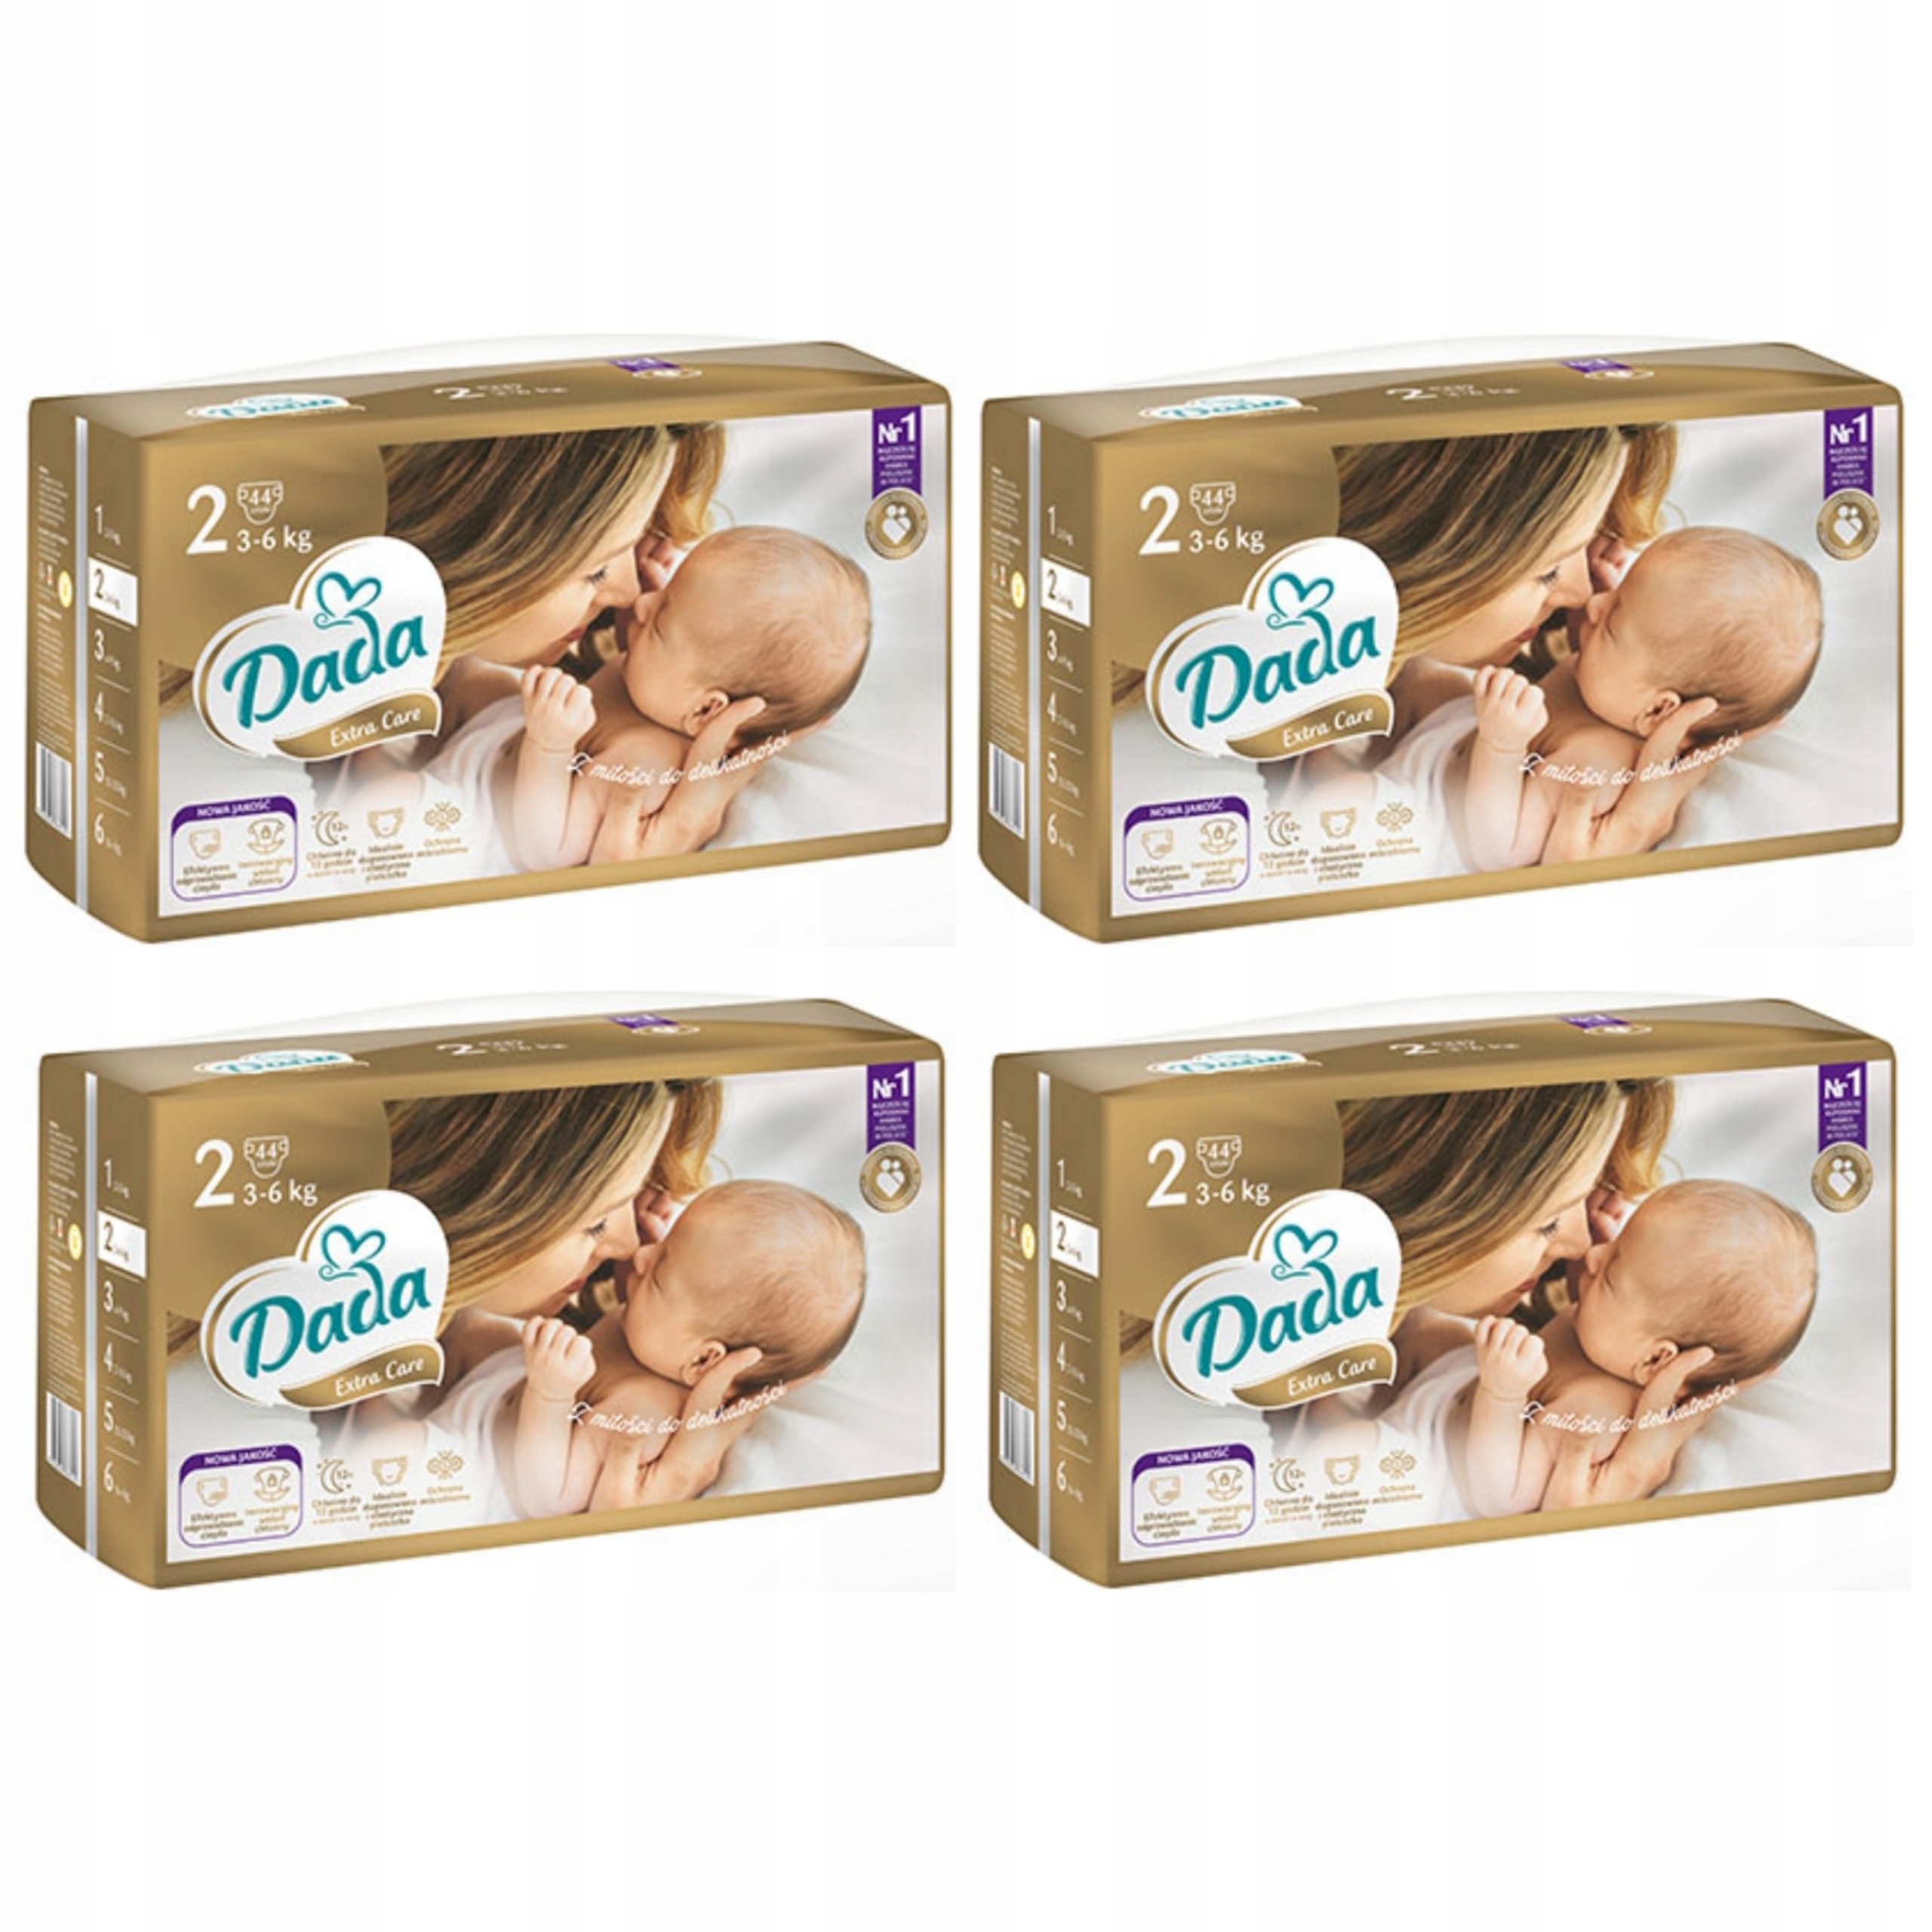 pampers epson l805